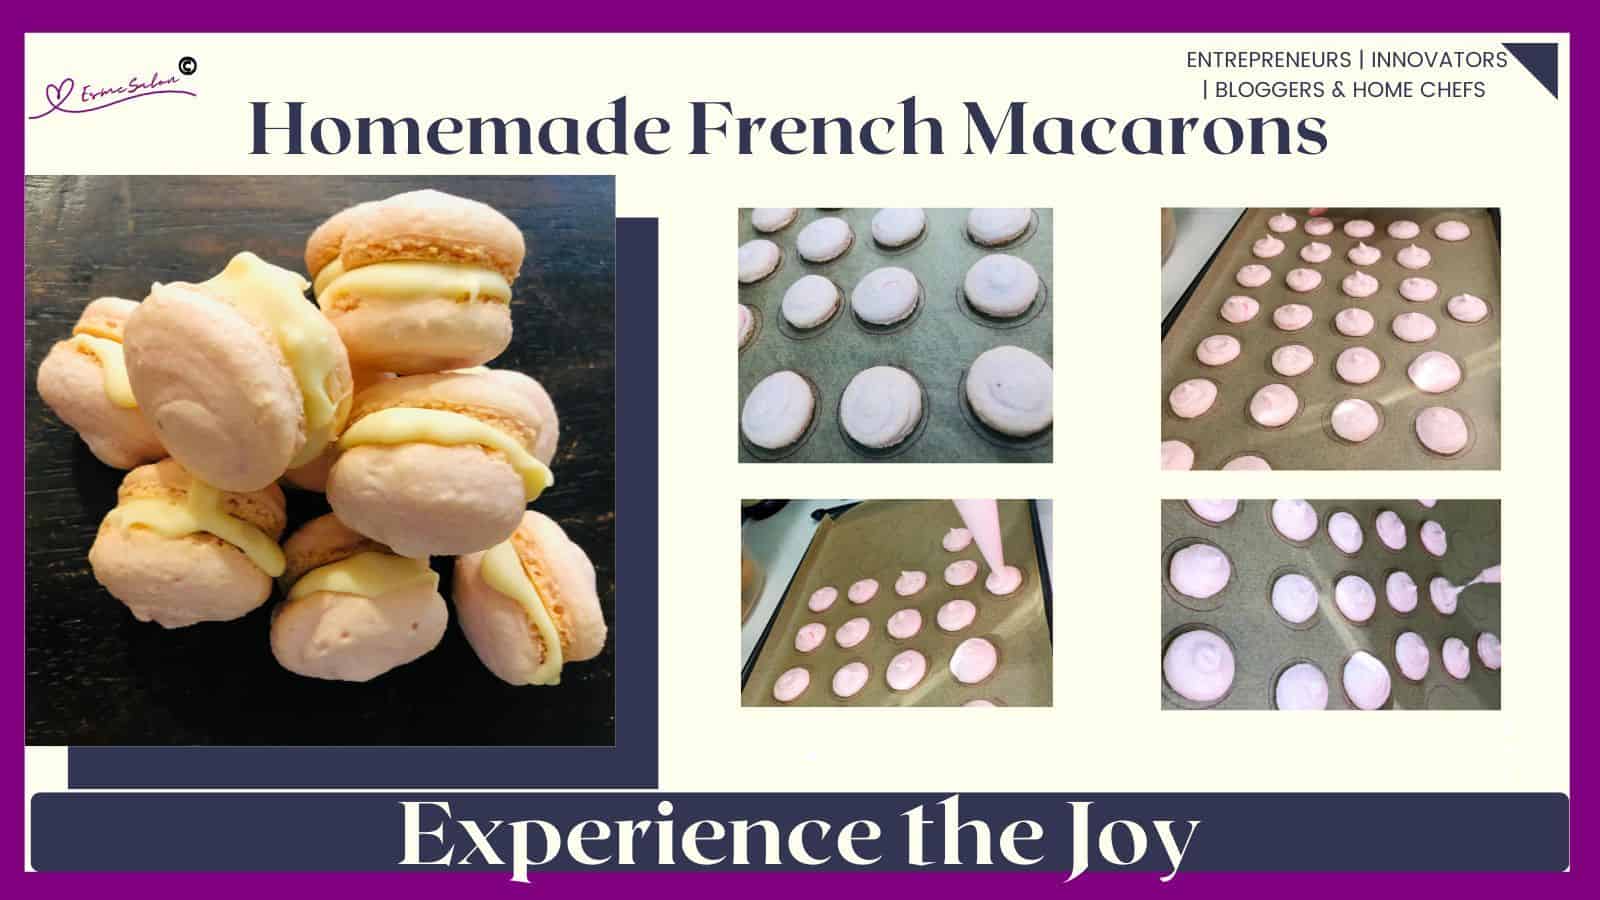 an image of pink French Macarons